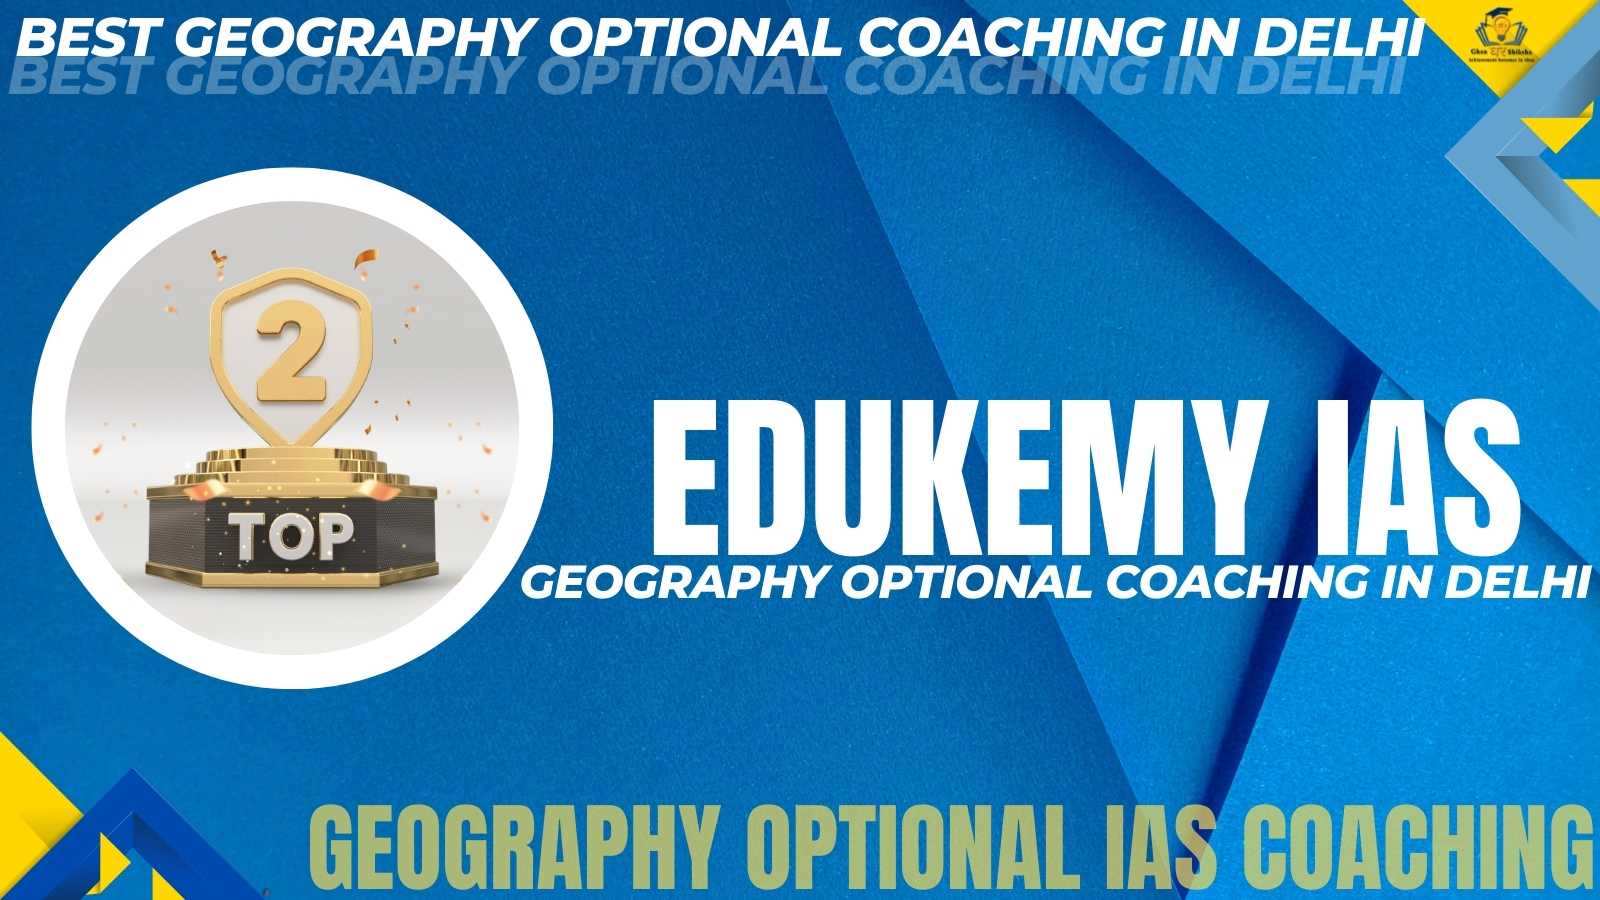 Geography Optional Coaching Center In Delhi